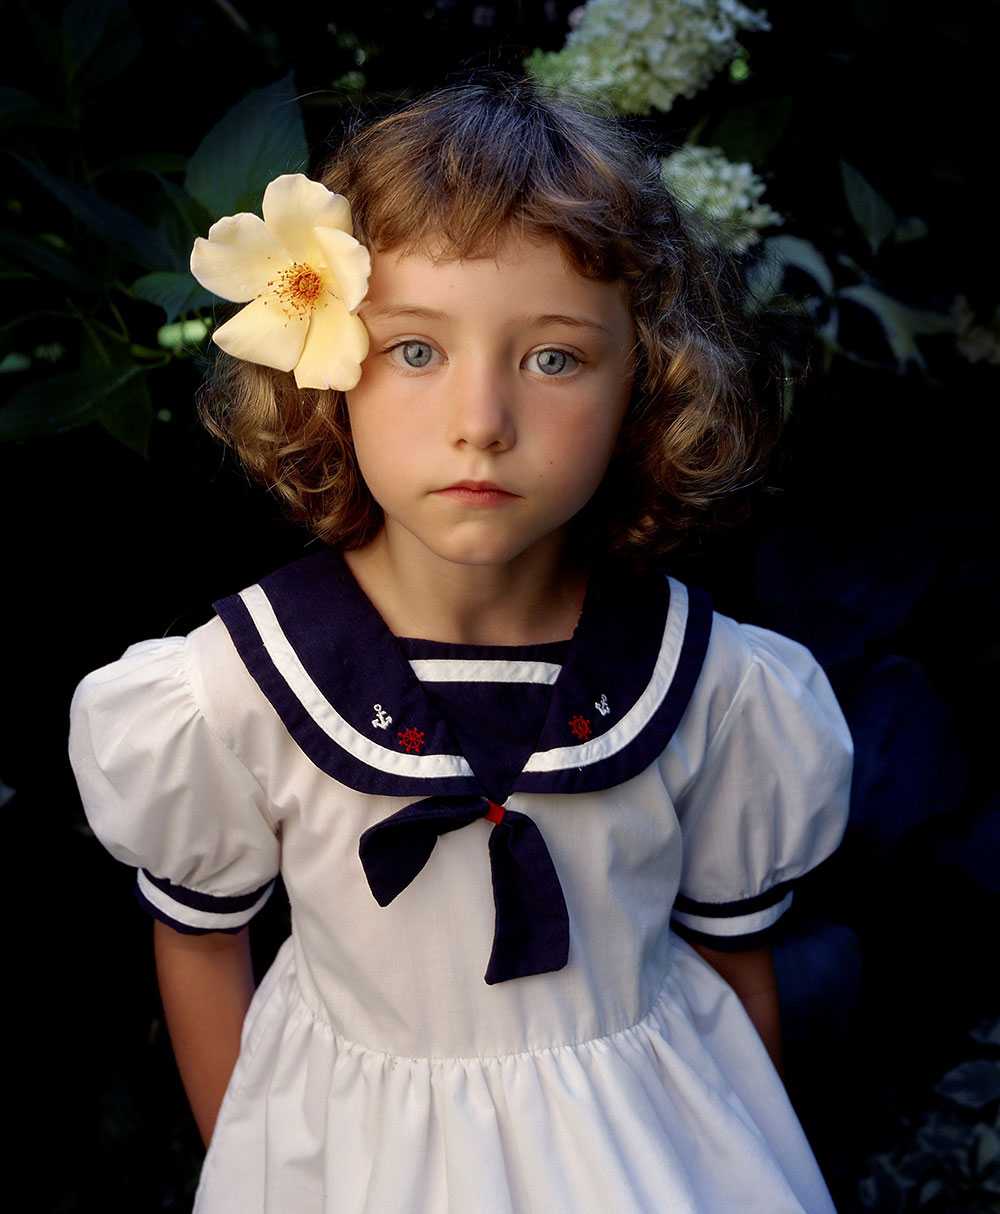 A young girl in a sailor dress looks up at the camera with a flower behind her ear.